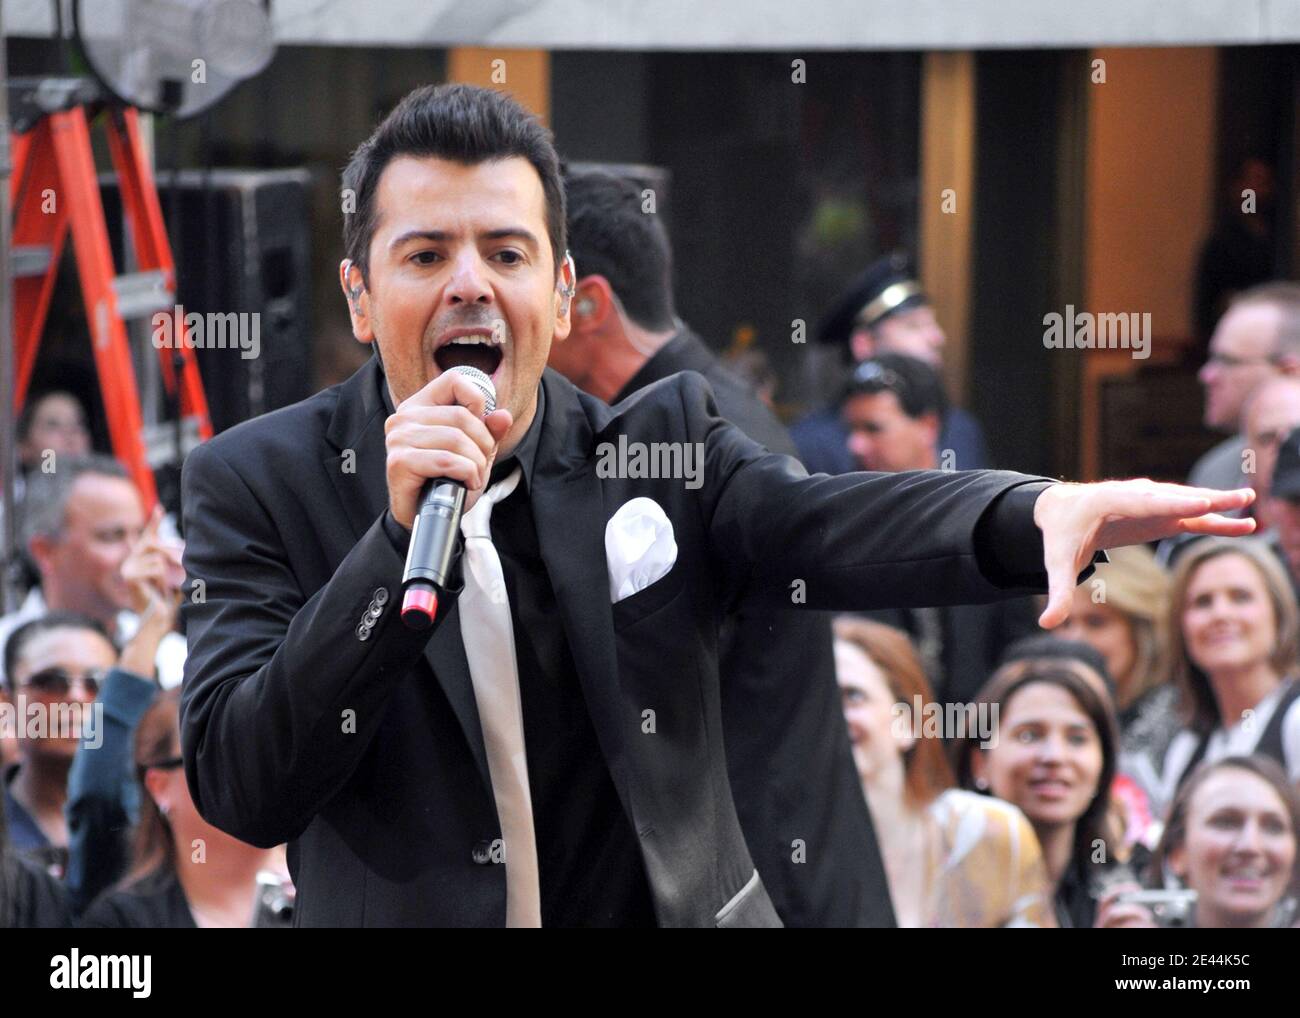 Jordan Knight of New Kids On The Block performs on NBC's 'Today' Show Concert Series at Rockefeller Plaza in New York City, NY, USA on May 8, 2009. Photo by Gregorio Binuya/ABACAPRESS.COM (Pictured: Jordan Knight, New Kids On The Block) Stock Photo